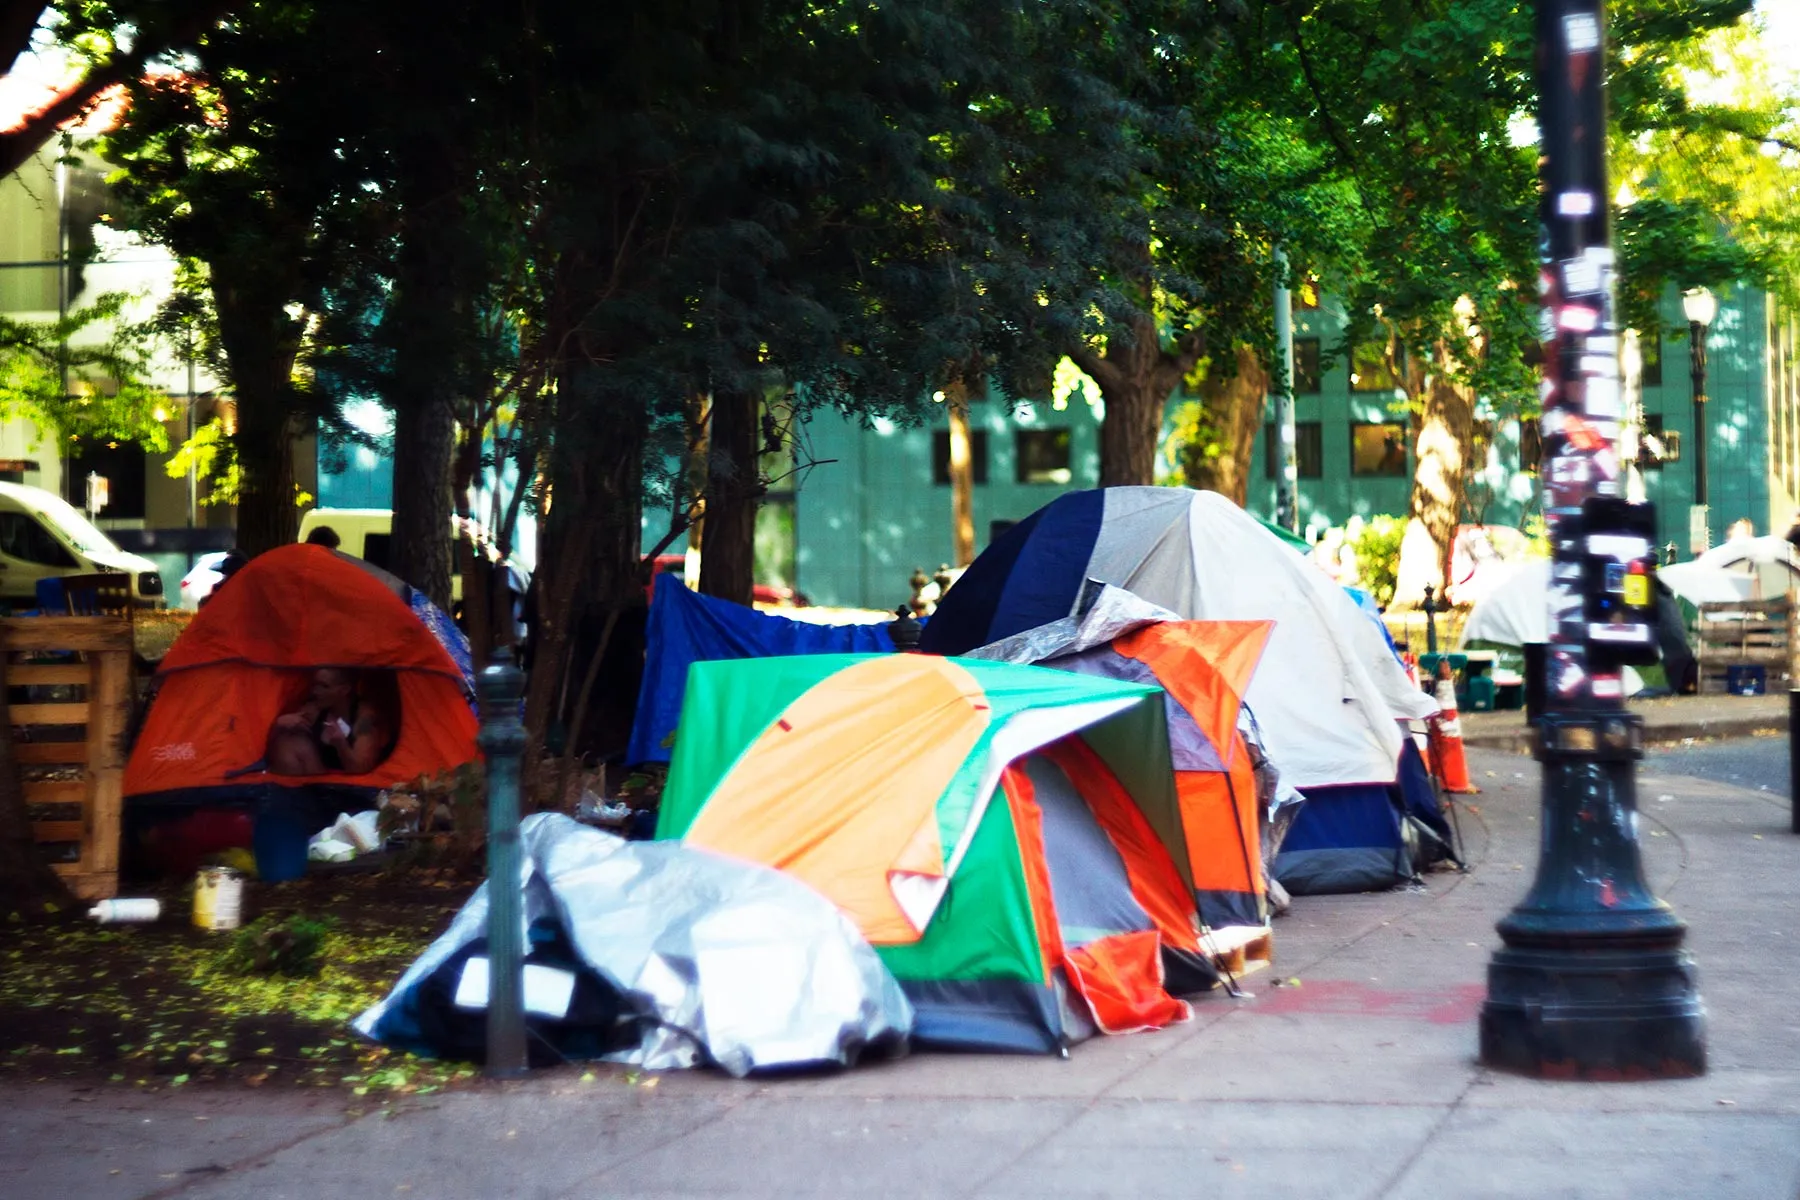 What Health Care Is Available if You’re Experiencing Homelessness?